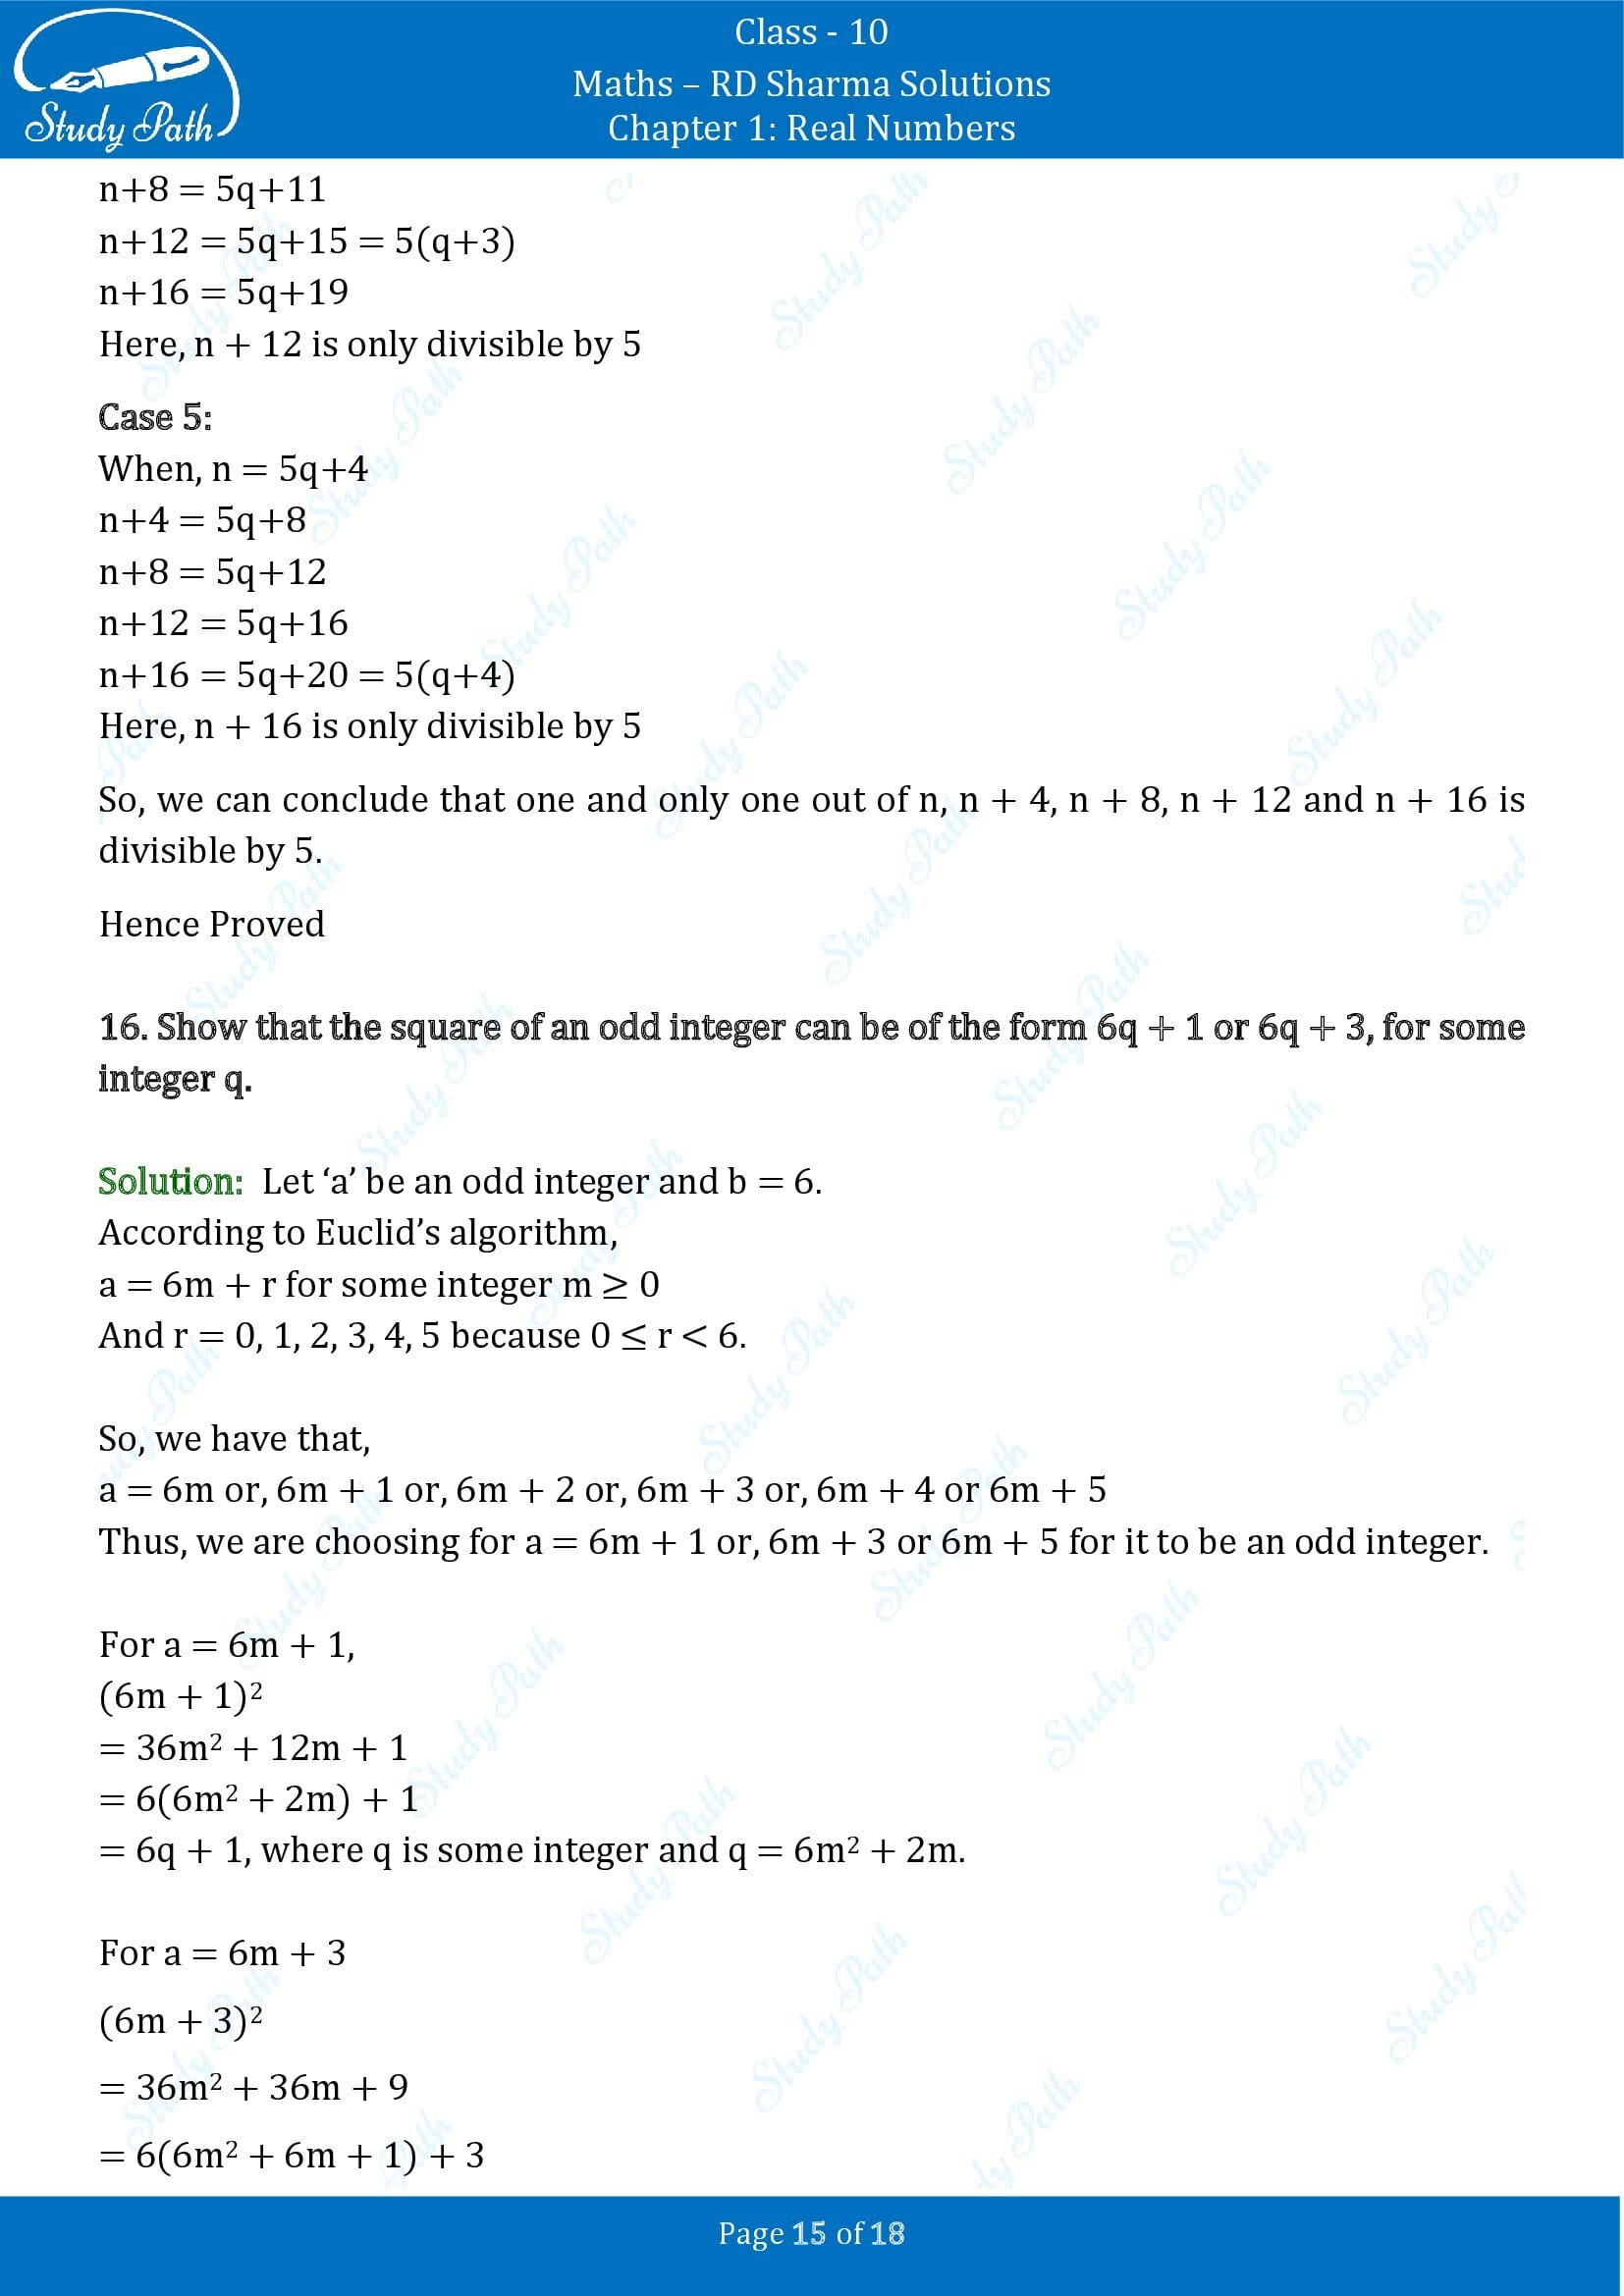 RD Sharma Solutions Class 10 Chapter 1 Real Numbers Exercise 1.1 00015